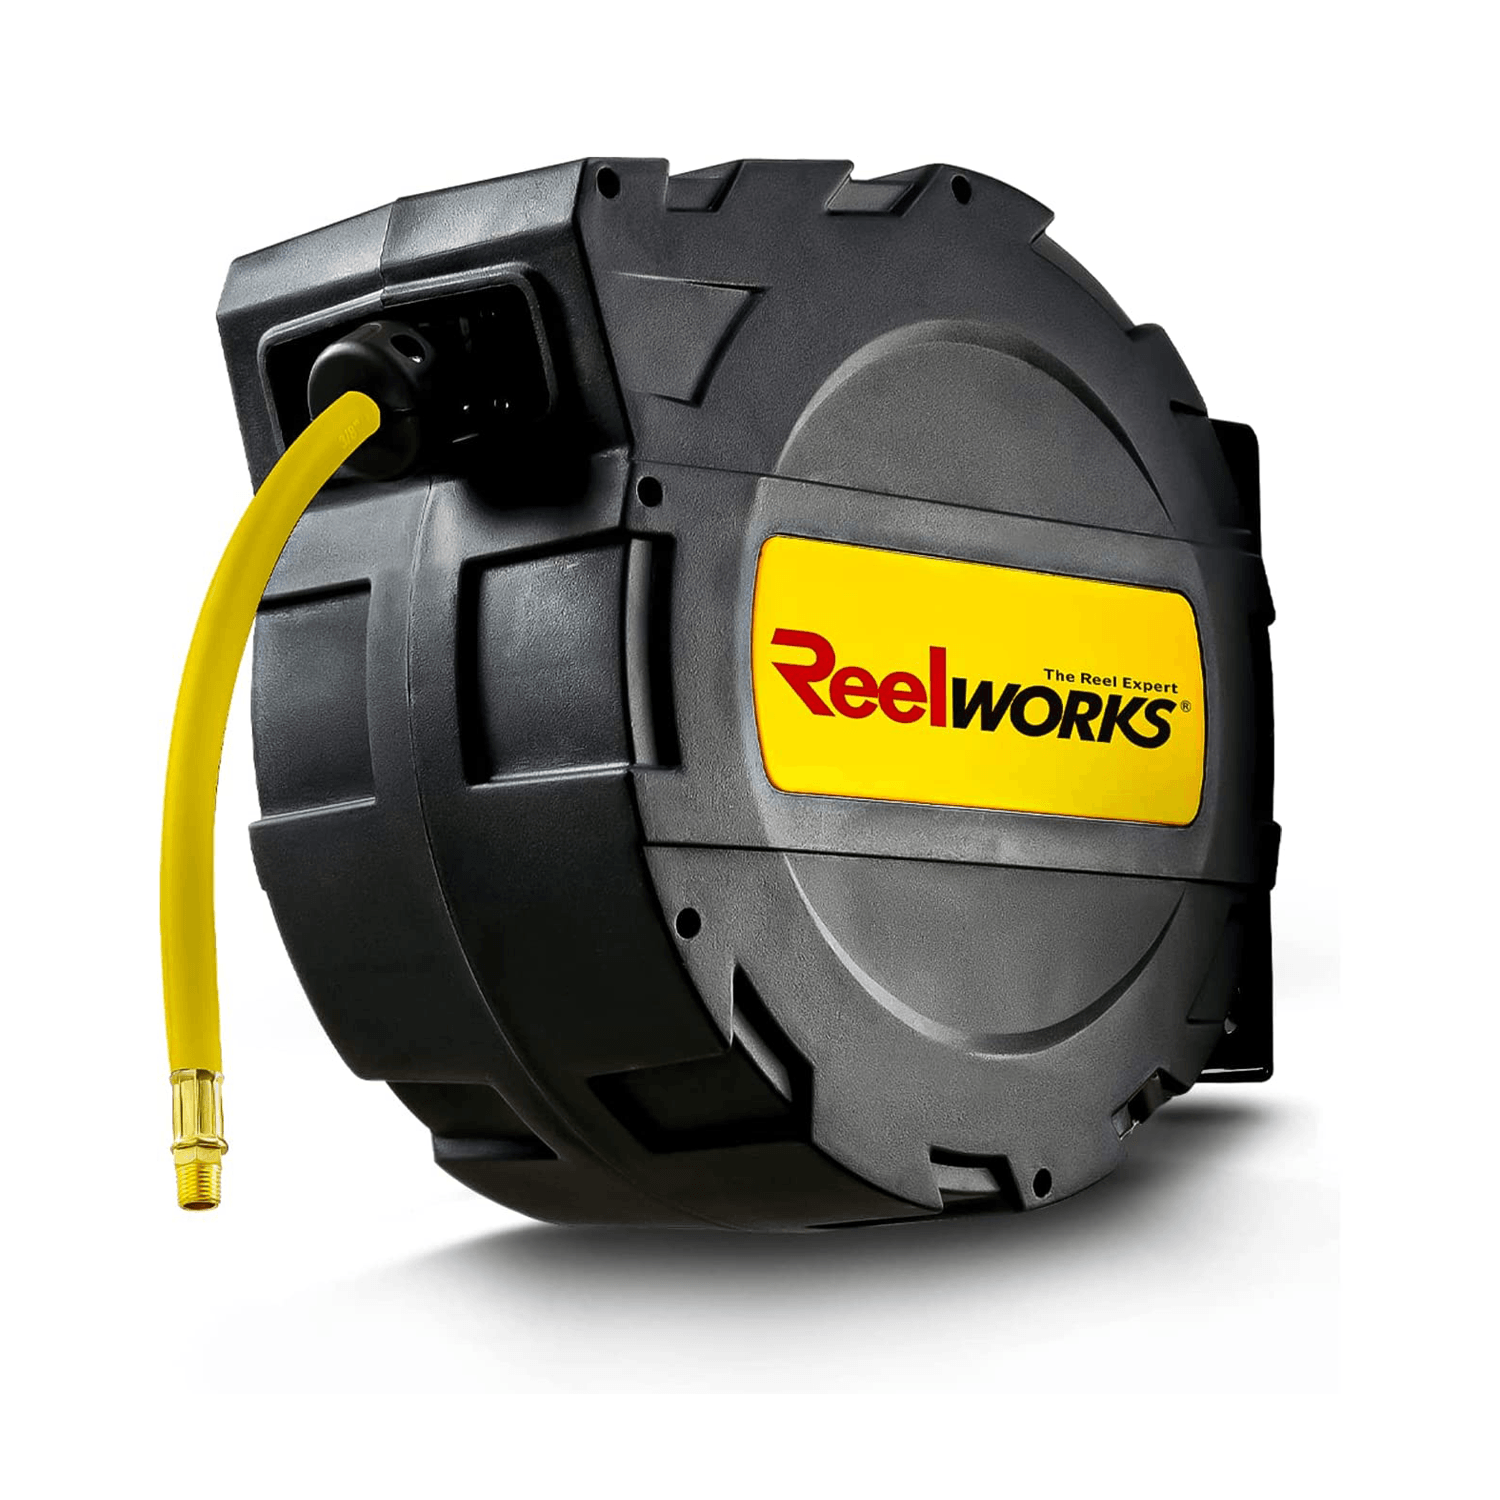 ReelWorks Mountable Retractable Air Hose Reel - 3/8 x 50' Ft, 3